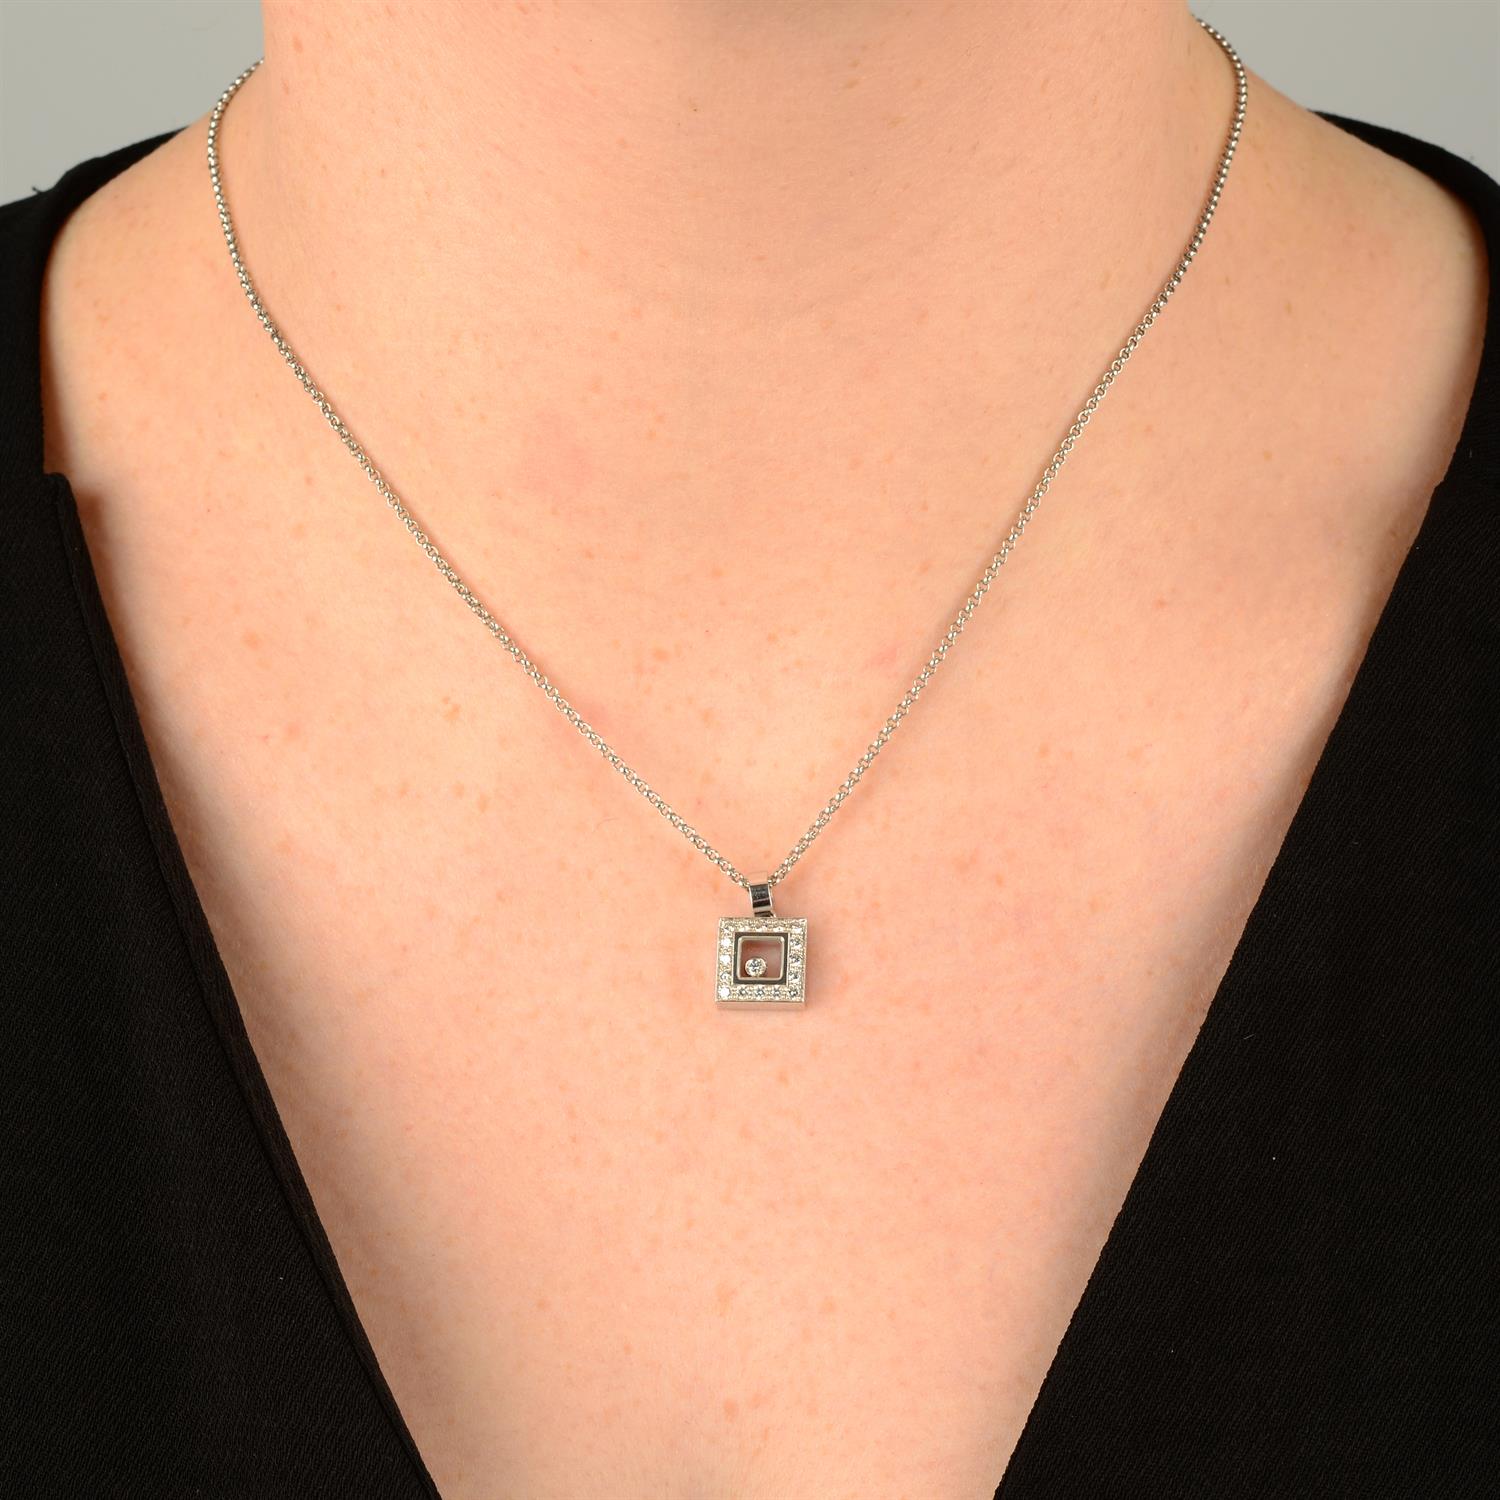 An 18ct gold 'Happy Diamonds' square-shape pendant, with chain, by Chopard. - Image 5 of 5